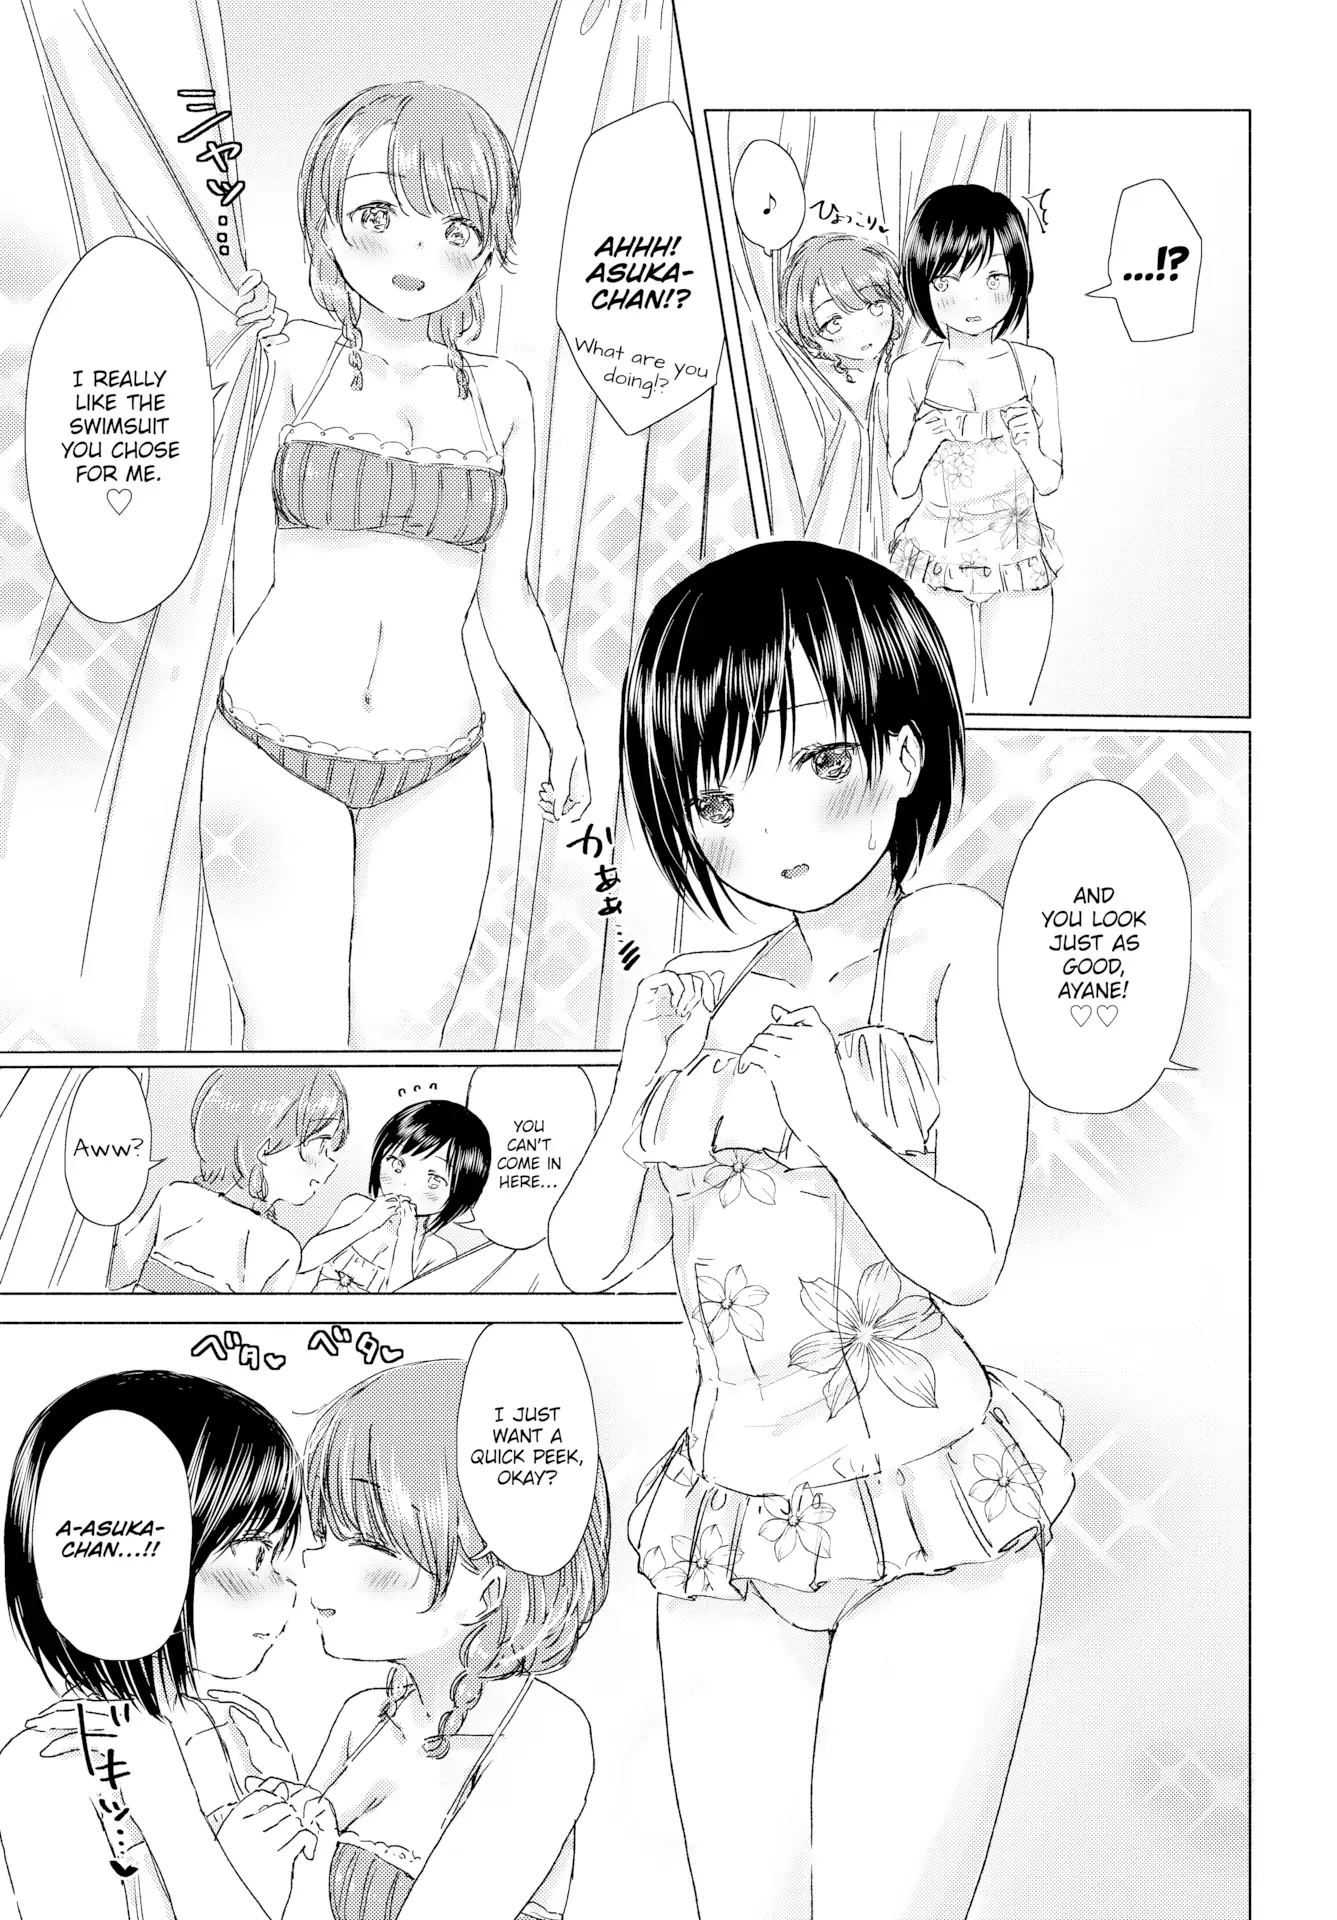 When We Get Home, Asuka-chan and I Will… Chapter 1 - page 5